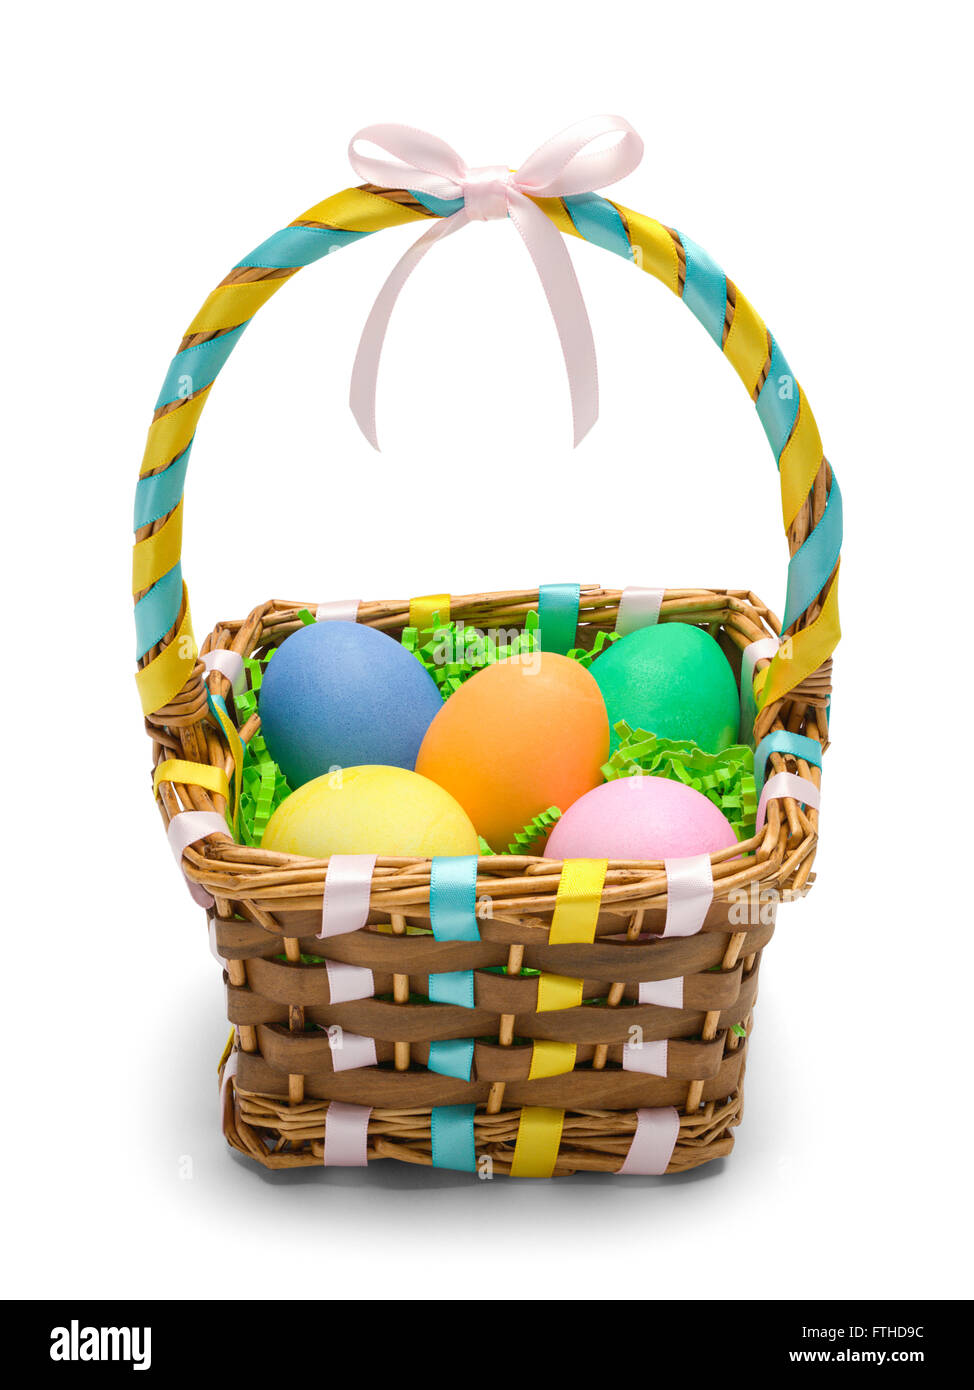 Easter Basket with Colored Eggs Isolated on White Background. Stock Photo